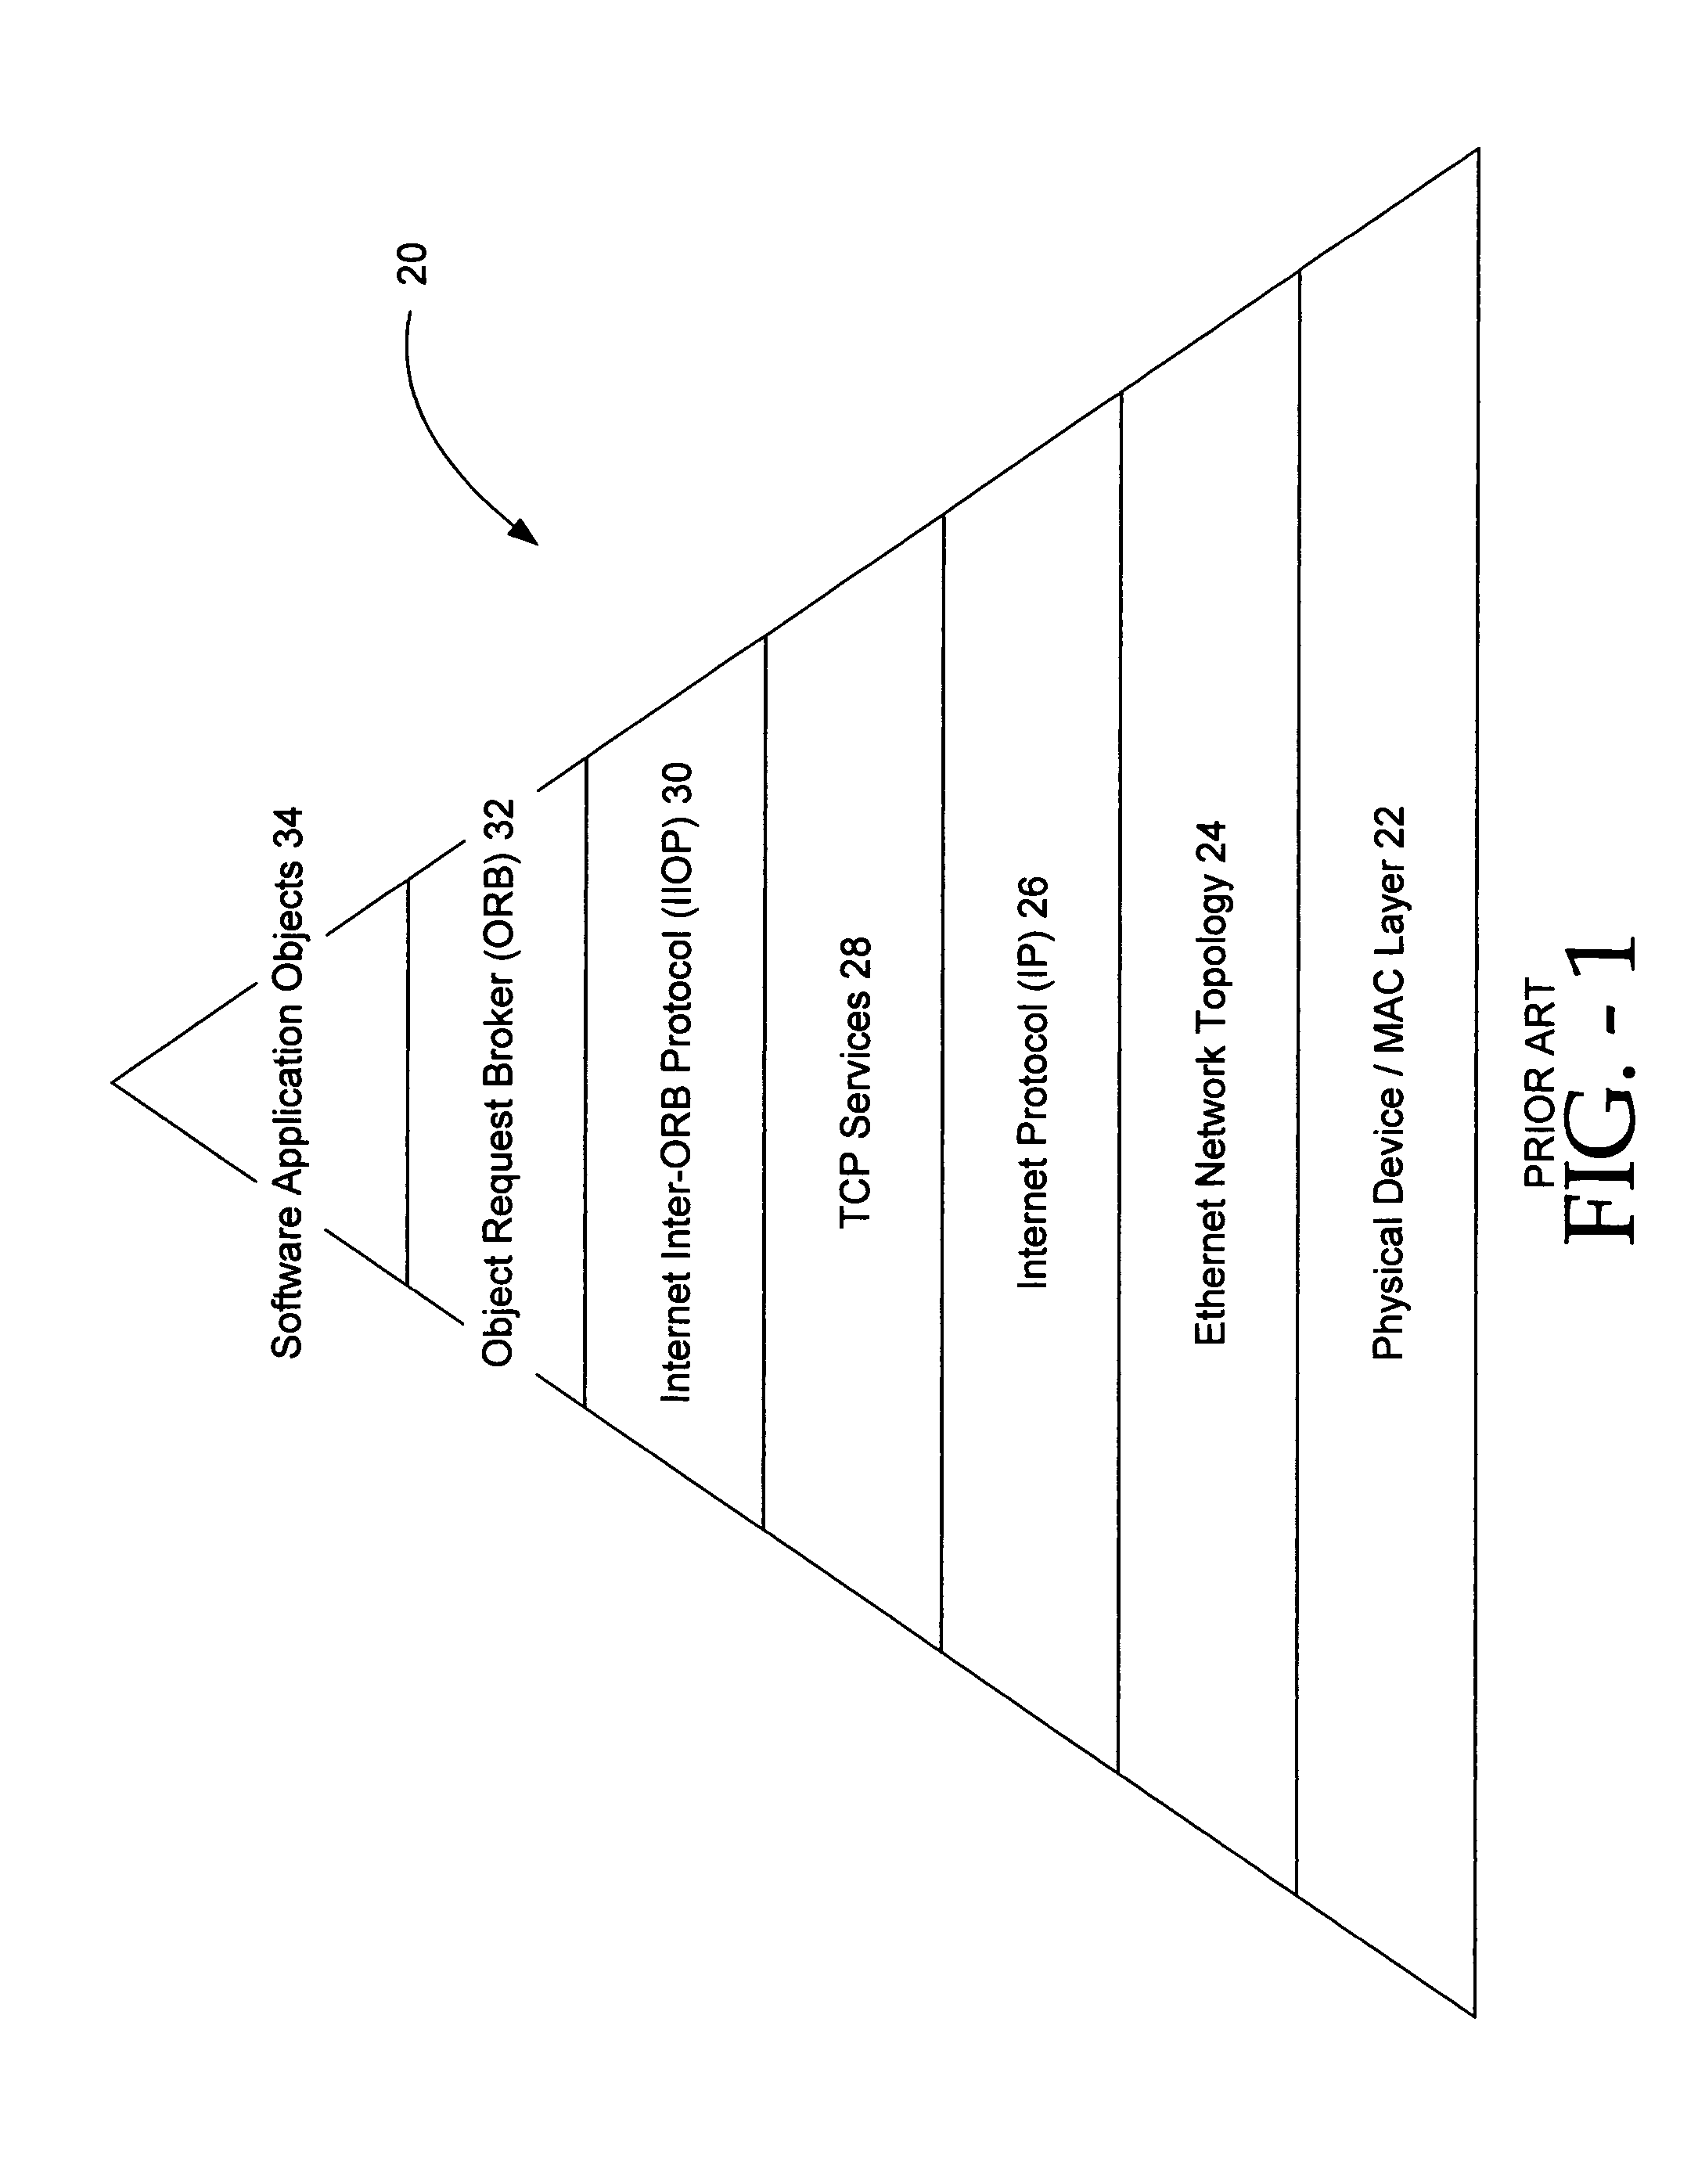 System and method for concentration and load-balancing of requests